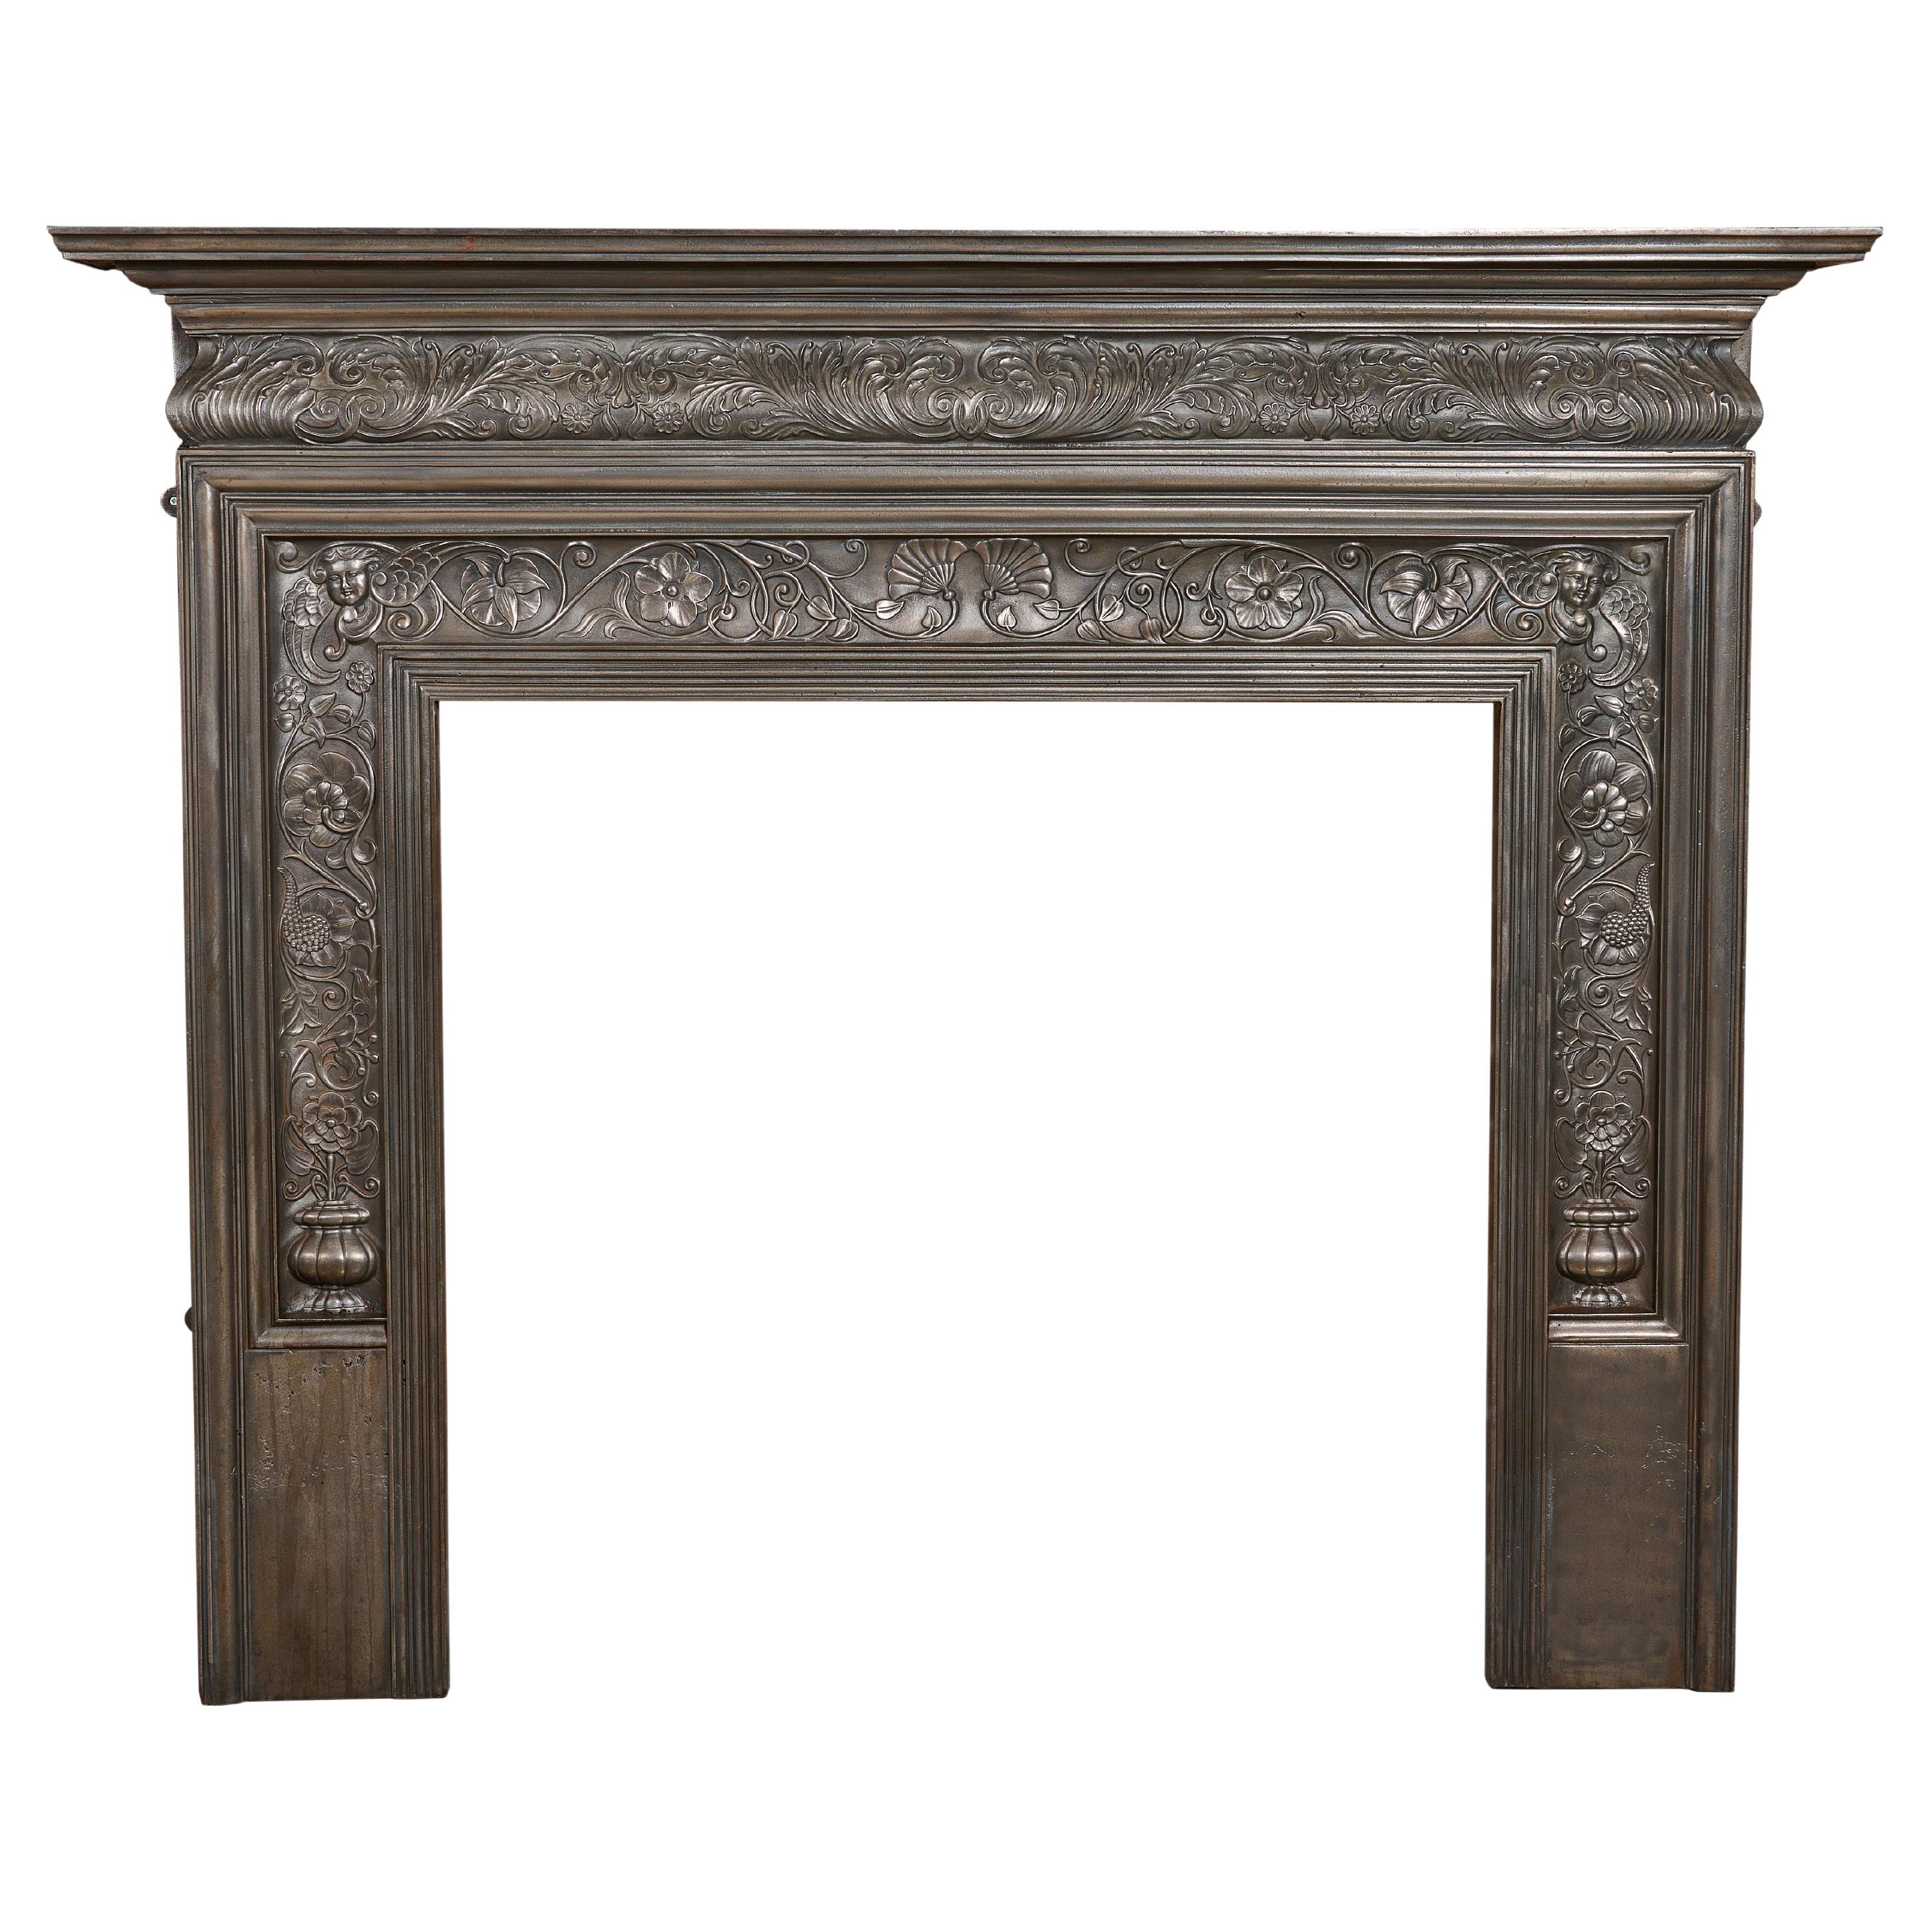 English Polished Cast Iron Fireplace Surround by Coalbrookdale For Sale